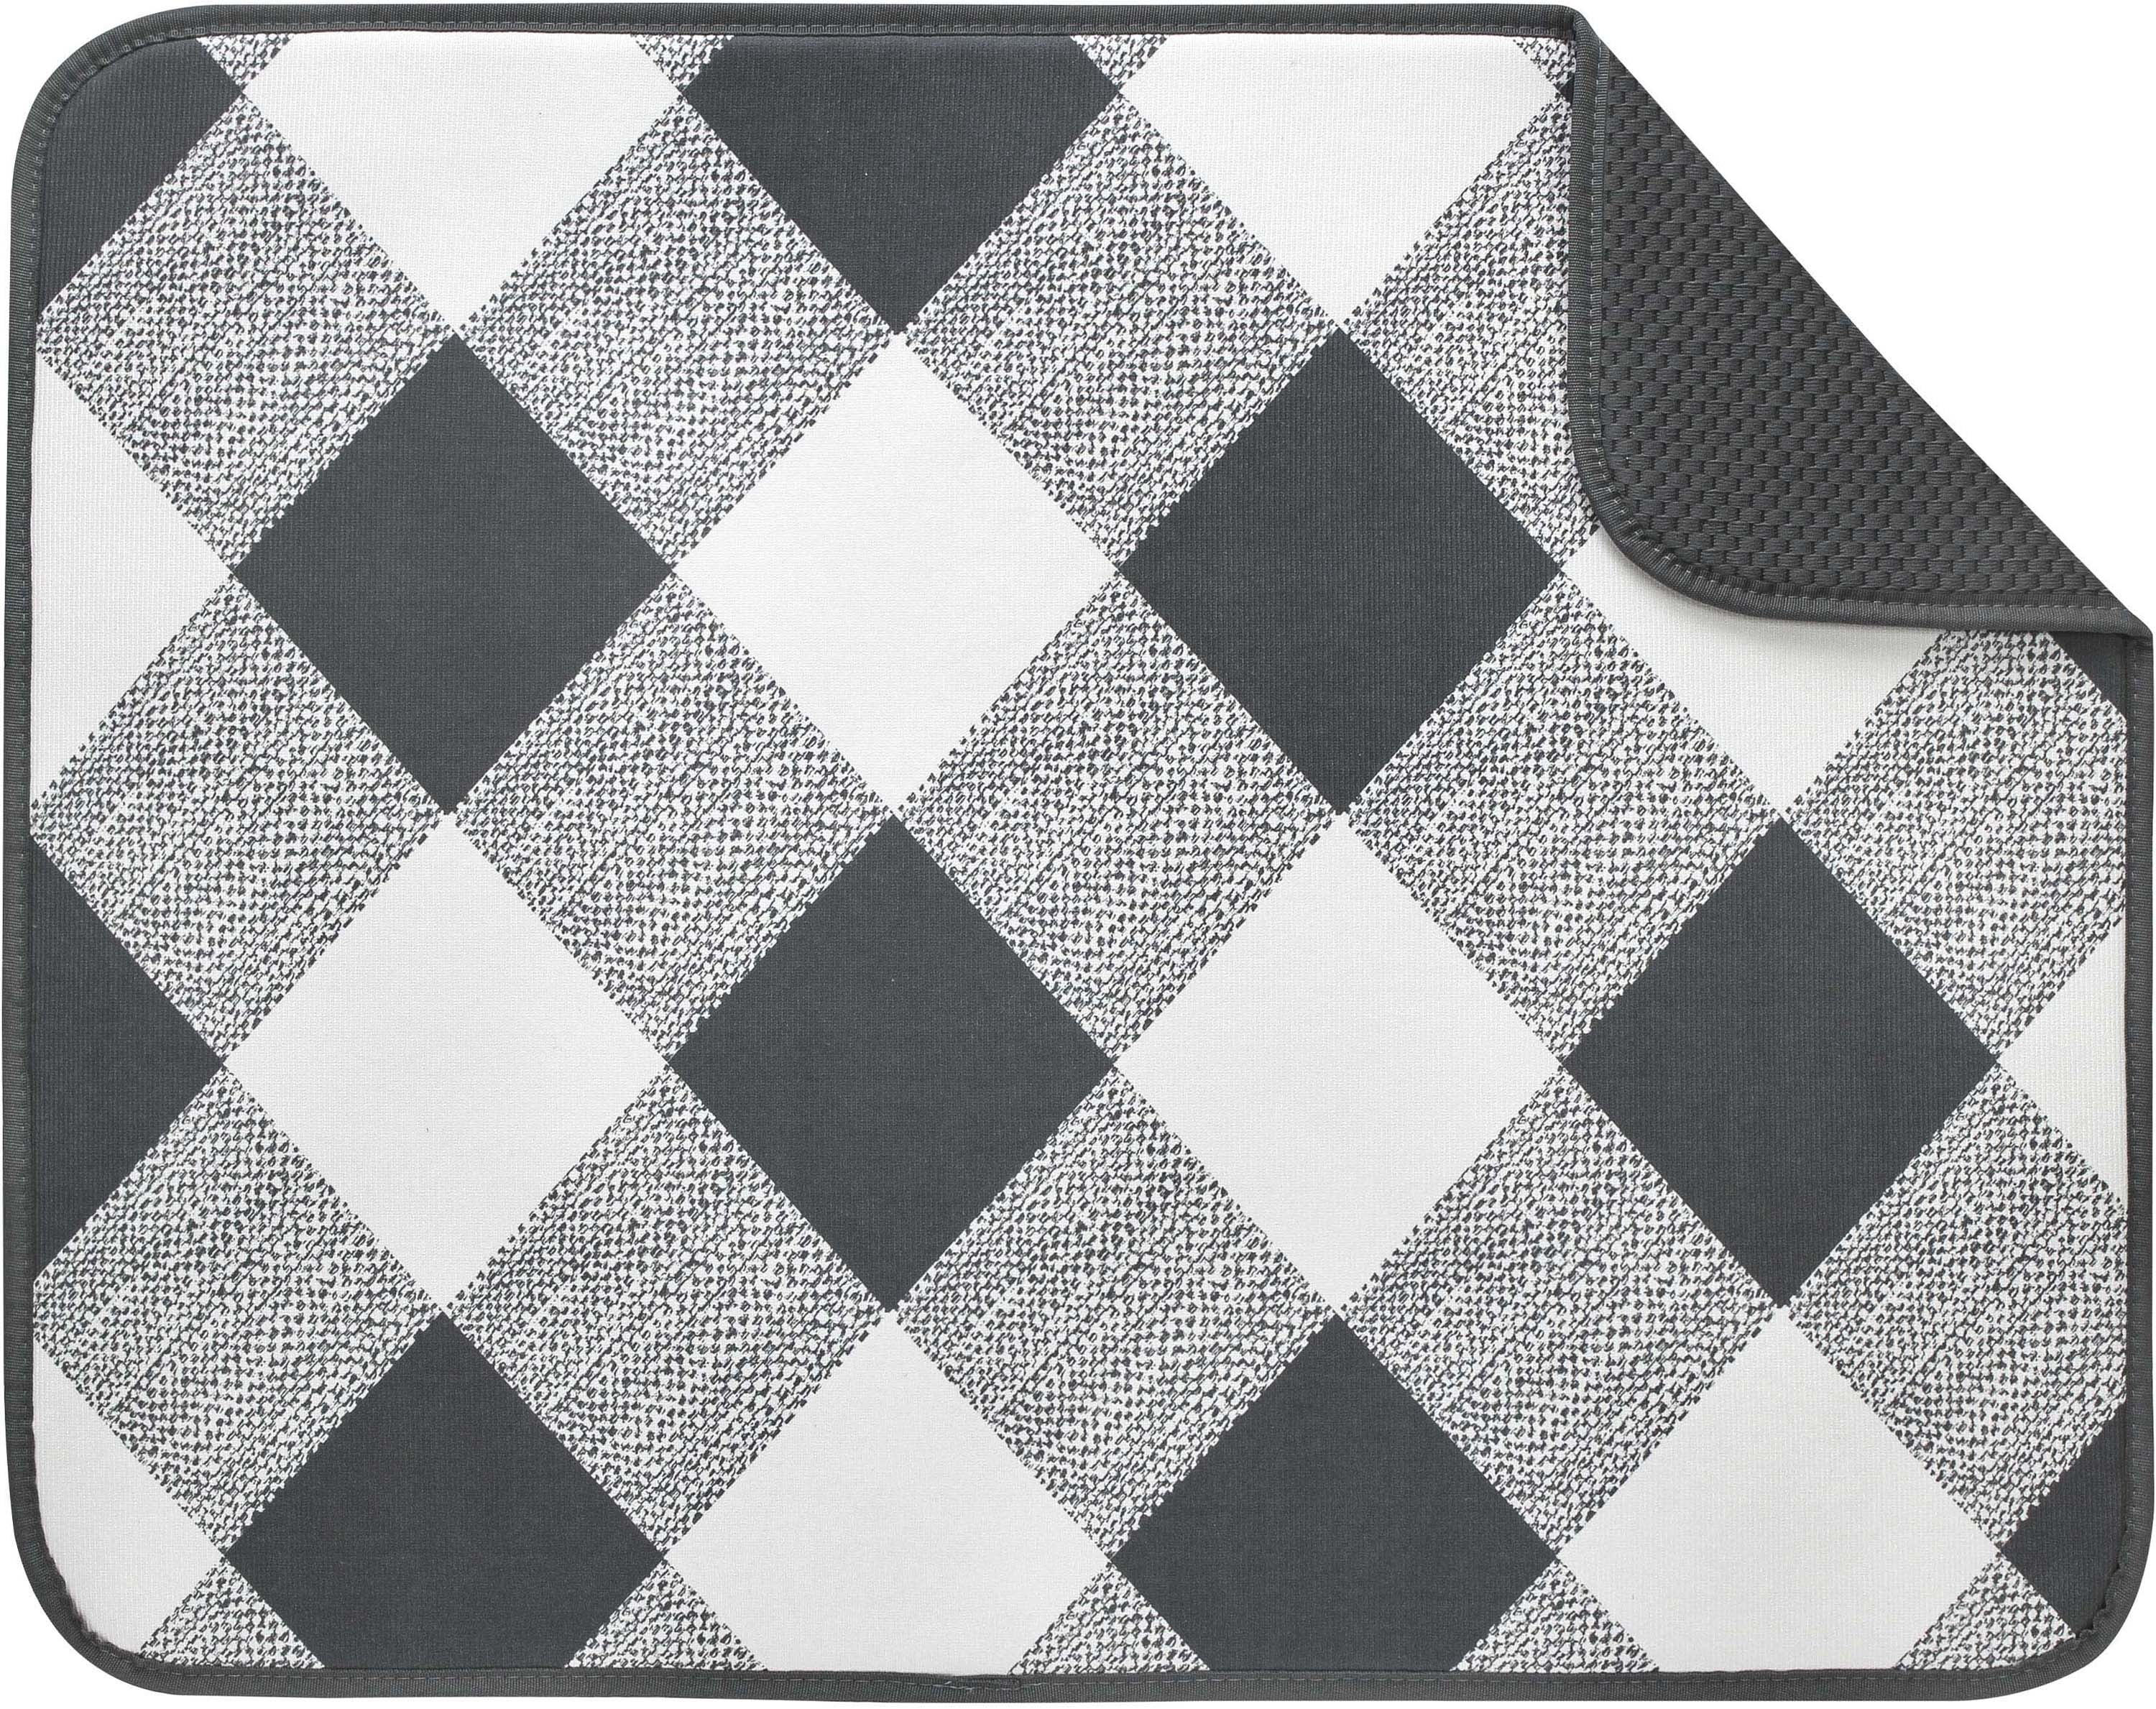 Style Selections 24-in W x 18-in L x 0.25-in H Cloth Drying Mat in